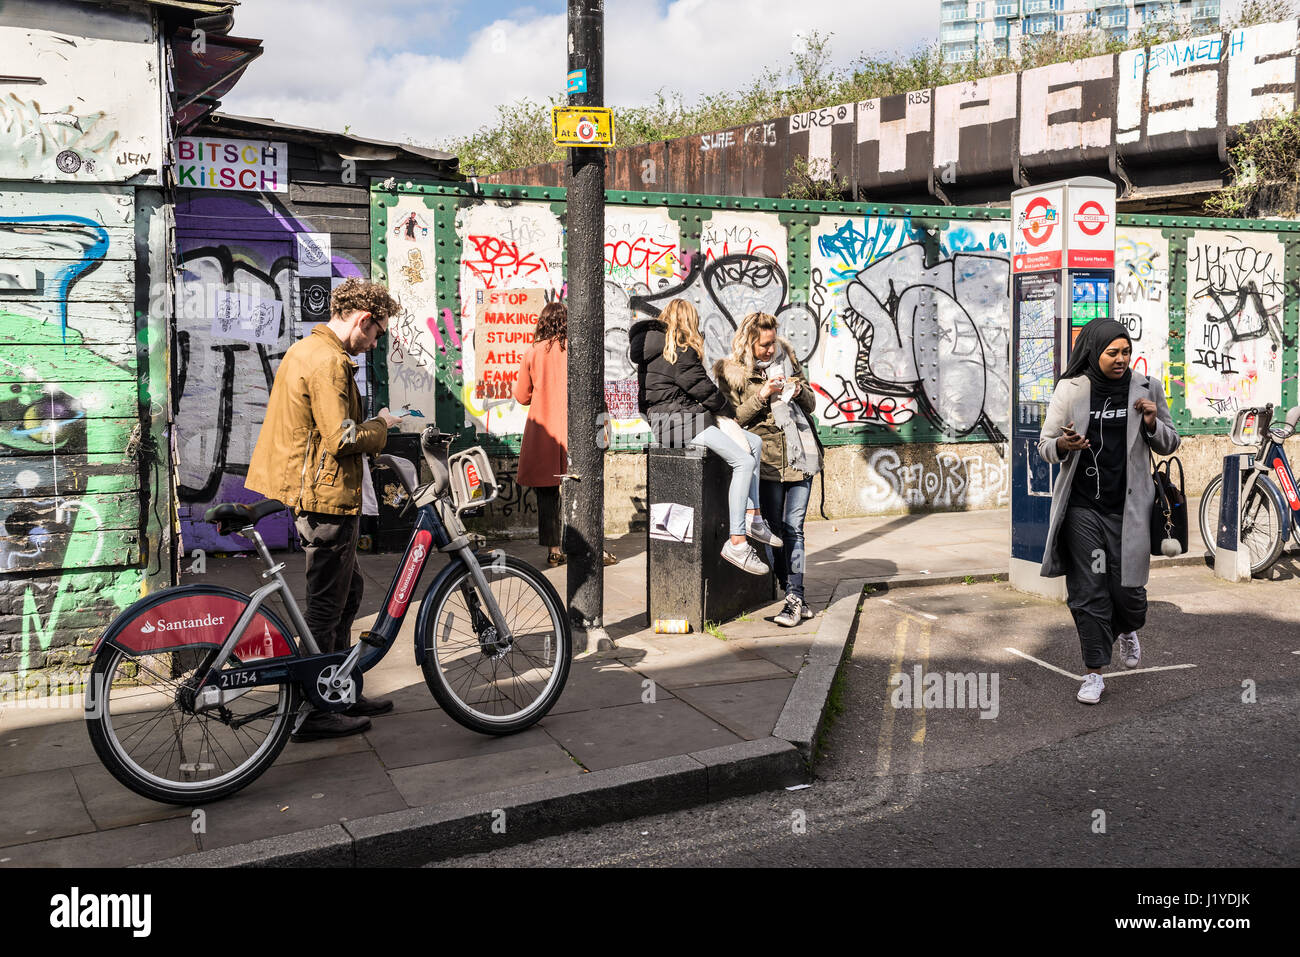 Street view of Brick lane with young hipster people walking and graffiti in background. Brick Lane, Shoreditch, London, UK Stock Photo